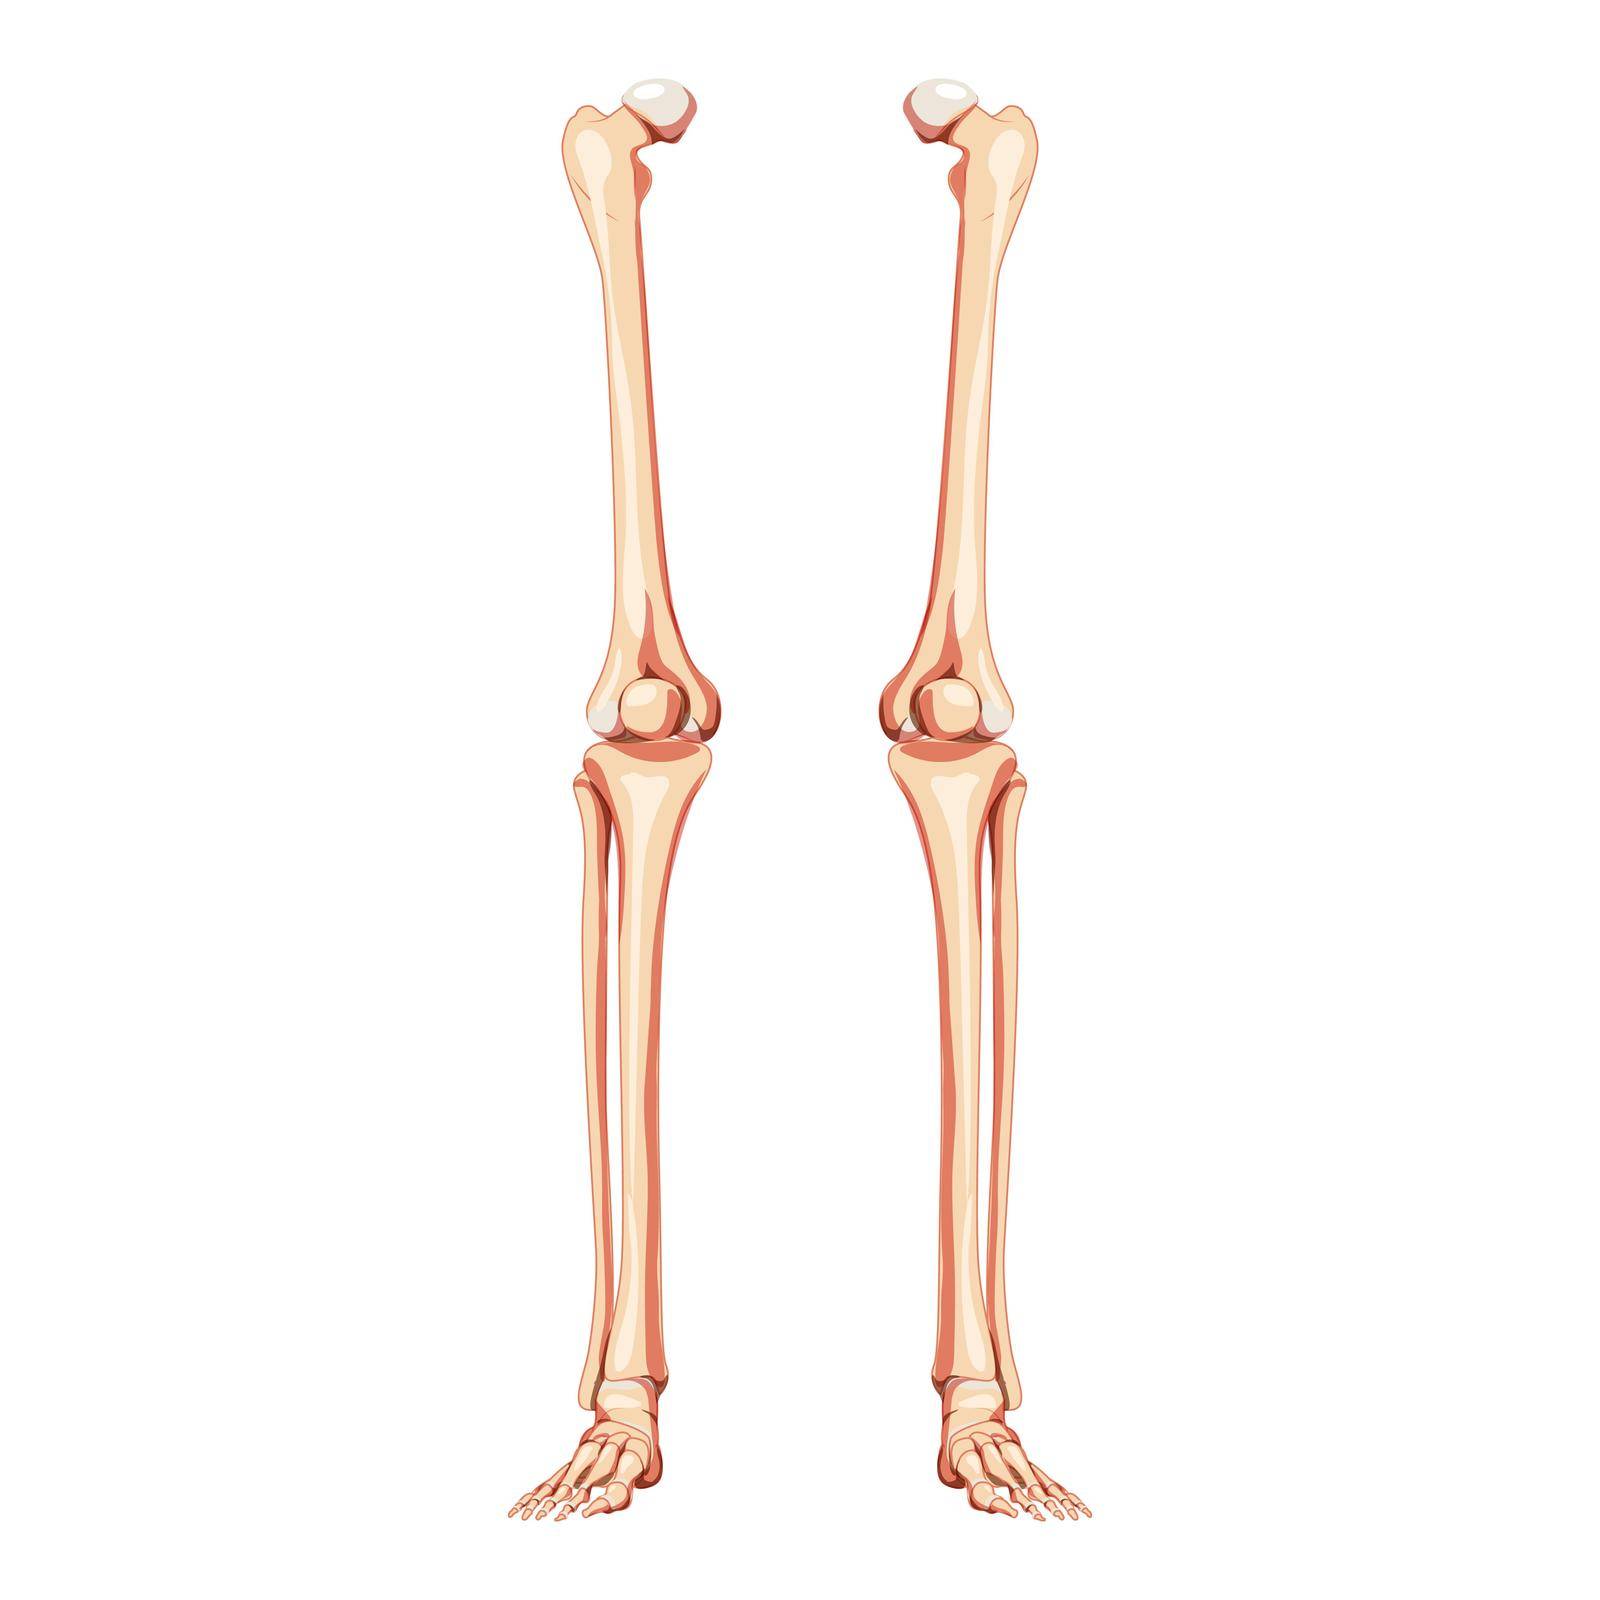 Thighs and legs lower limb Skeleton Human front Anterior ventral view. Set of femur, patella, fibula, tibia, foot realistic flat natural color concept Vector illustration of anatomy isolated on white